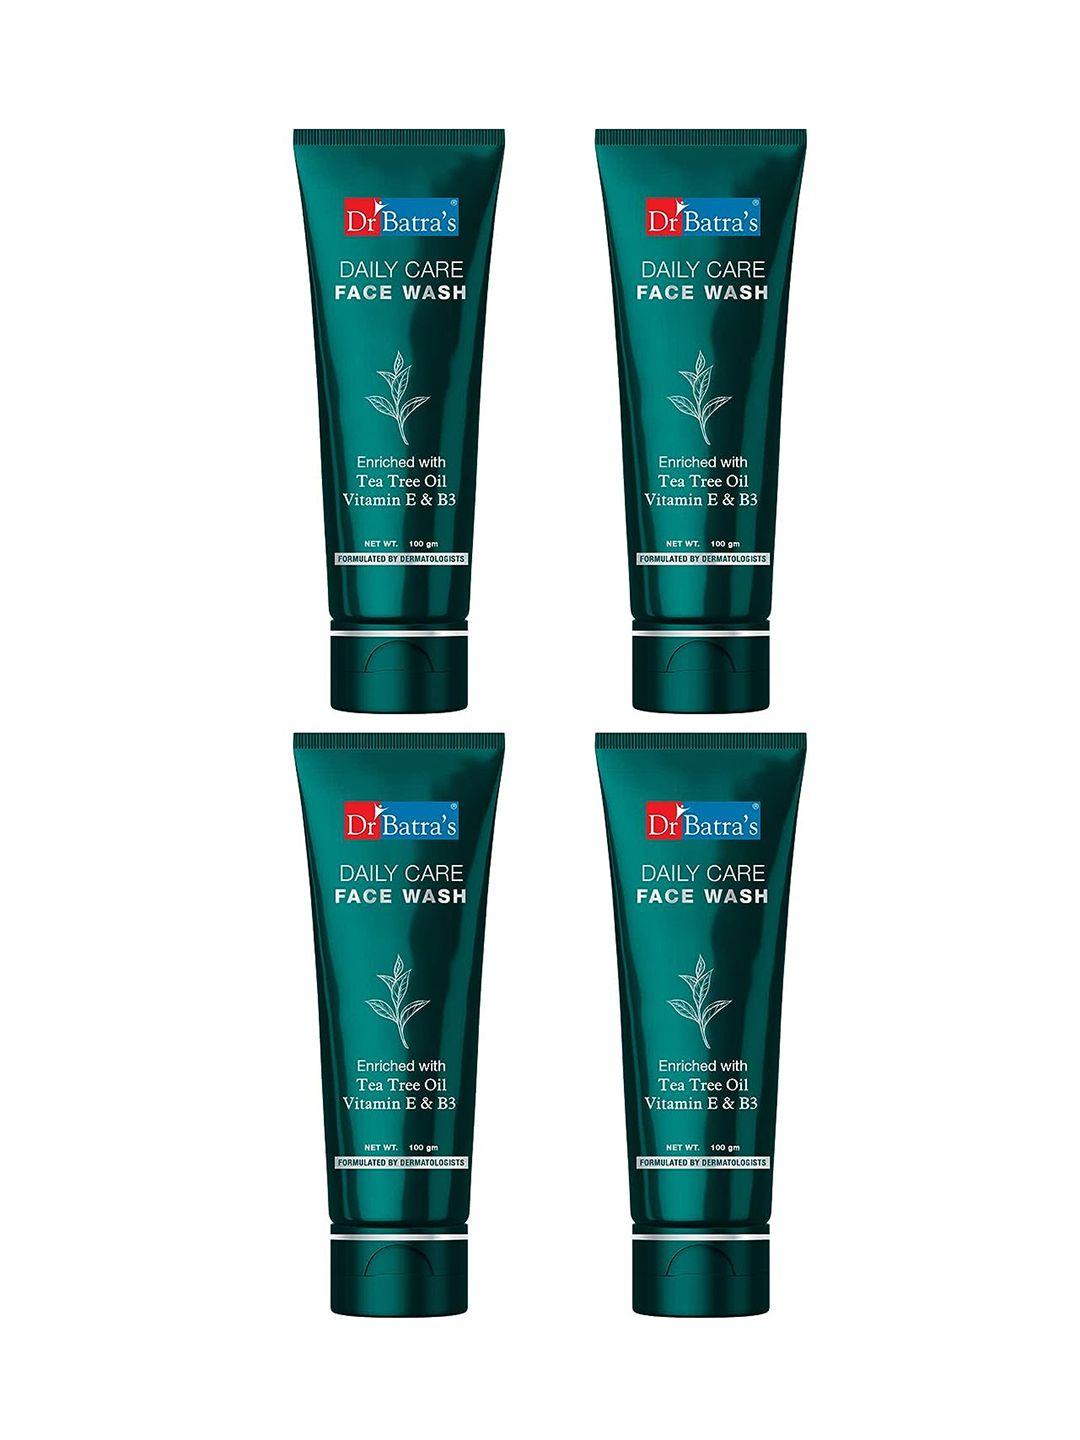 dr. batras set of 4 daily care face wash with tea tree oil & vitamin b3 - 100g each